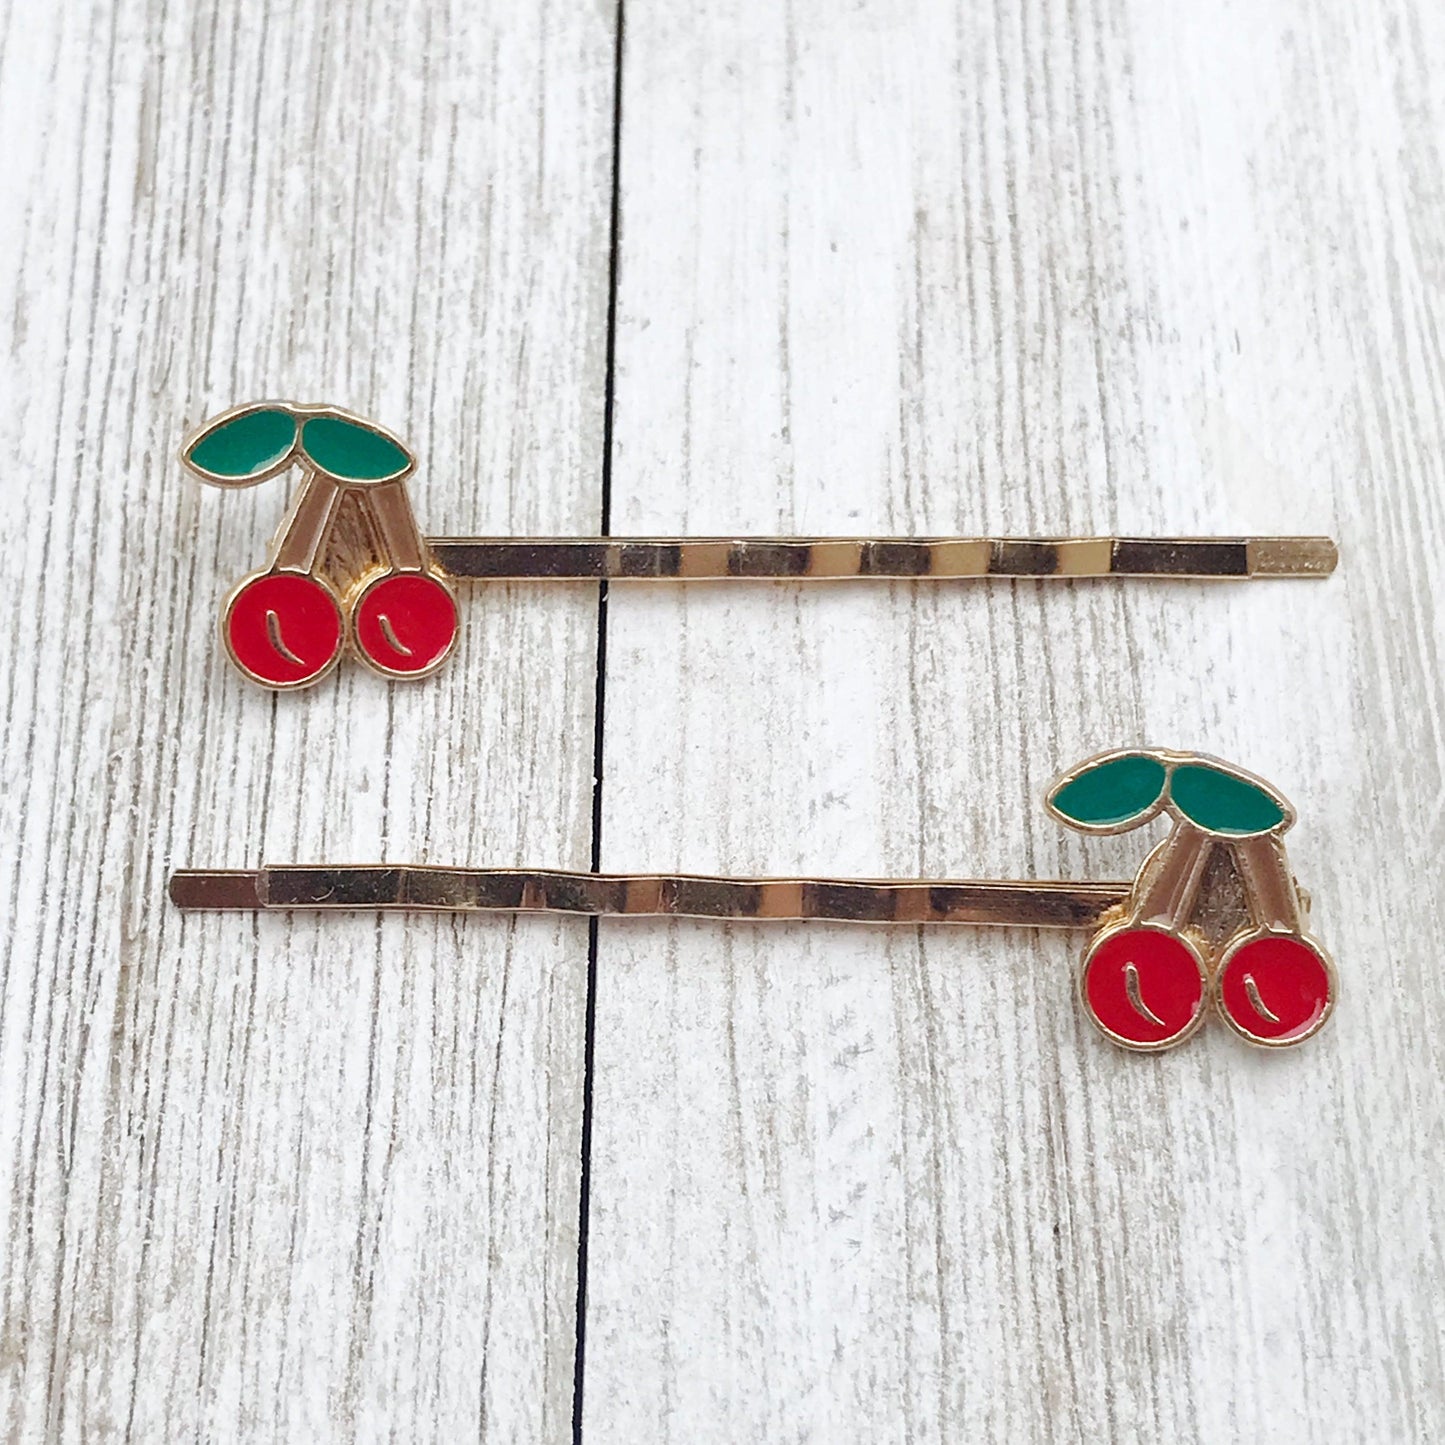 Enamel Cherry Bobby Pins: Sweet Accessories for Fun & Flirty Hairstyles